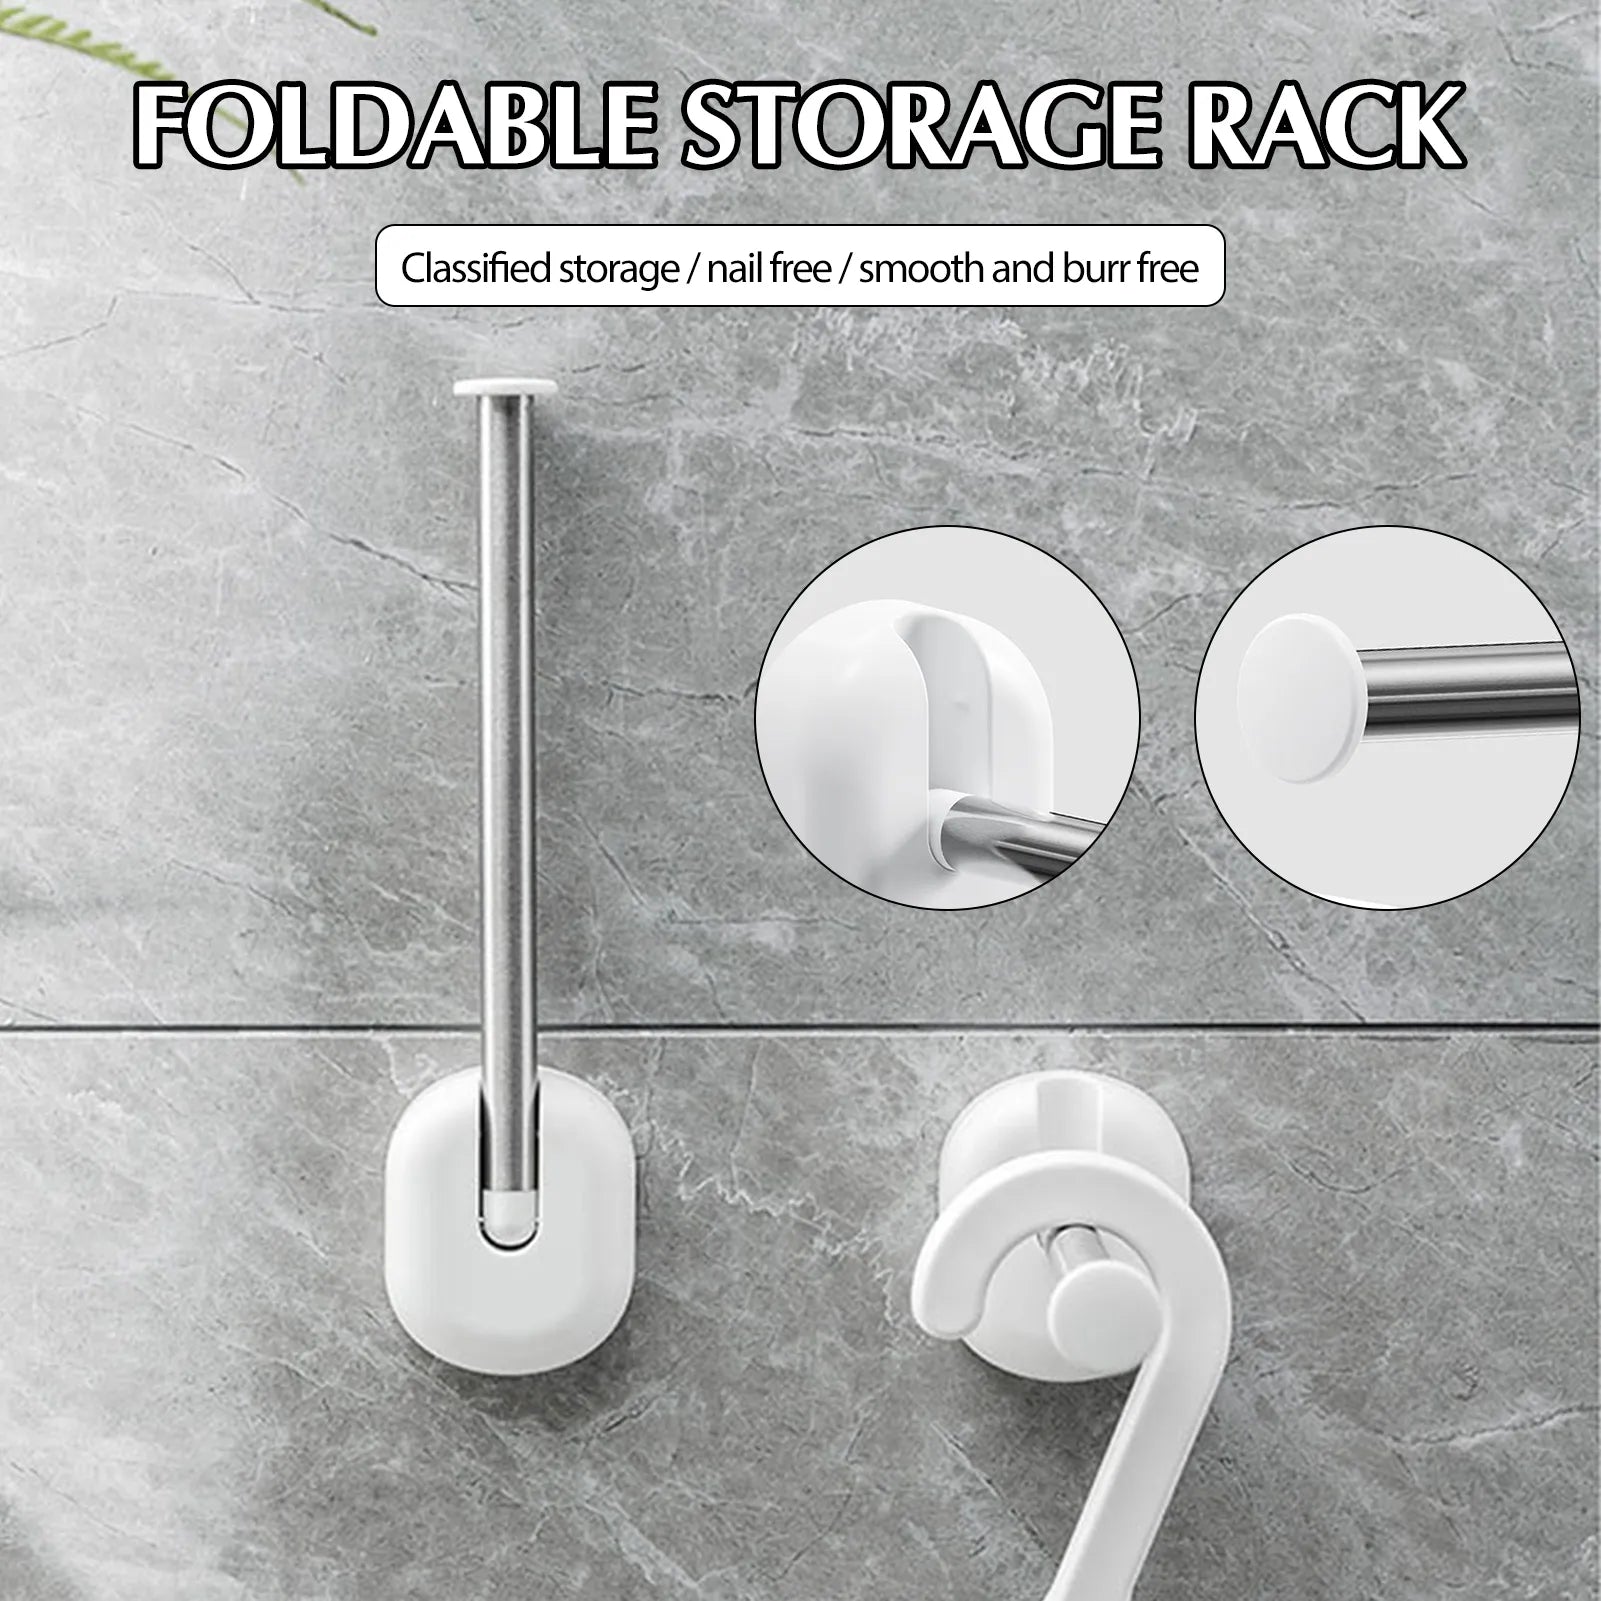 Rotating Hook Rod Stainless Steel Clothes Hanger Wall Hanging Free- Punch Folding Storage Rack Bathroom Balcony Drying Organizer